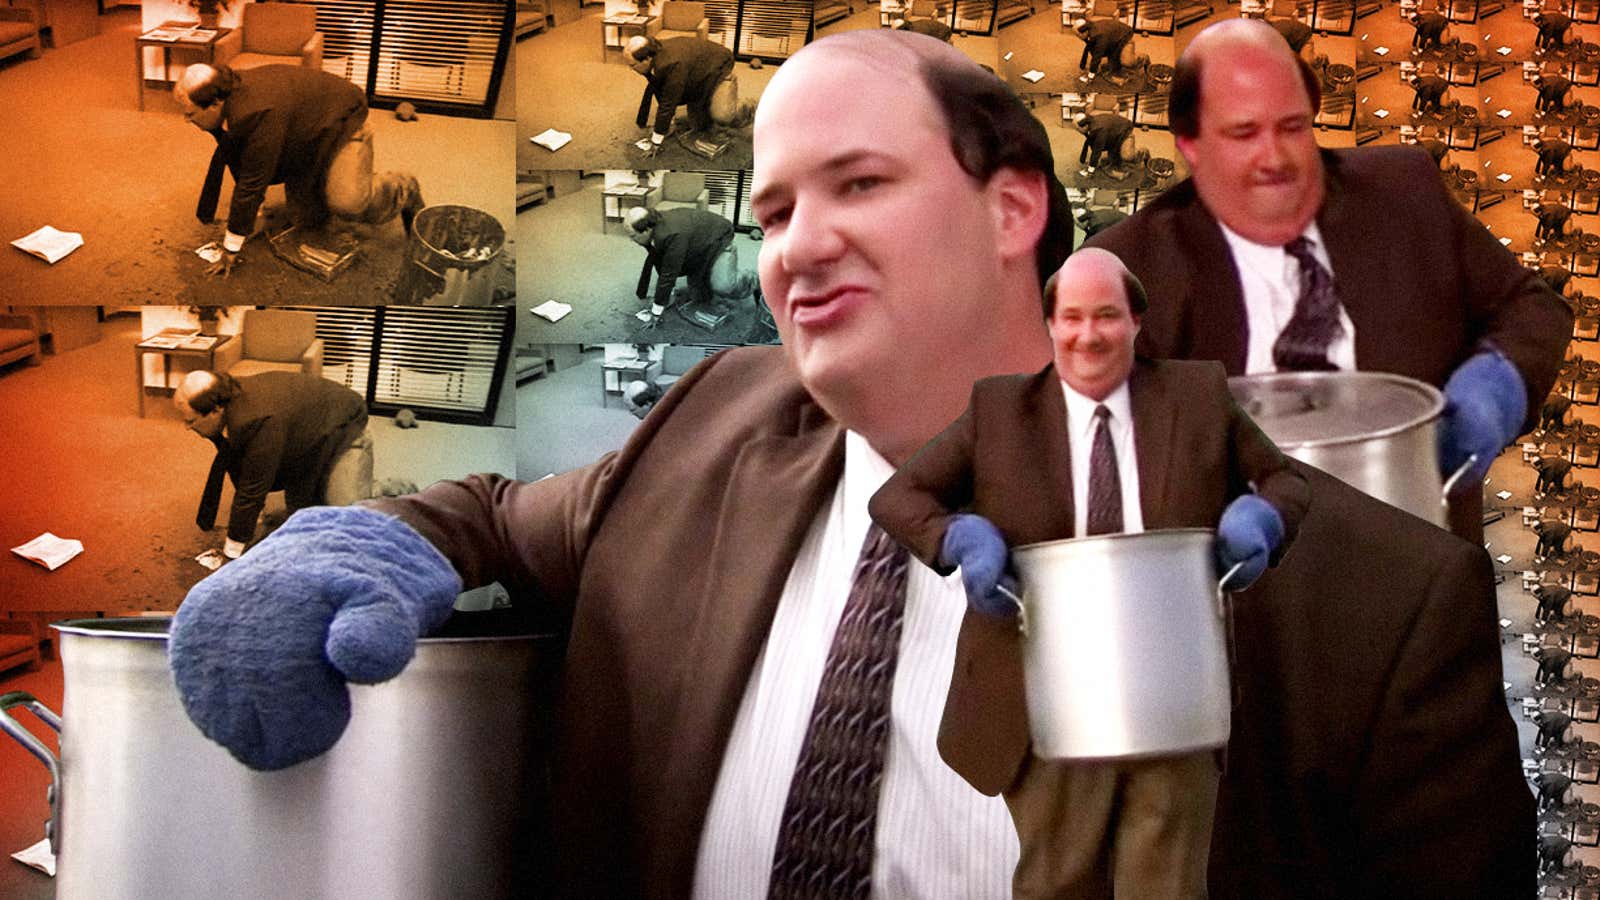 “It’s probably the thing I do best”: Brian Baumgartner brings some of “Kevin’s famous chili” to The Office (Screenshot)